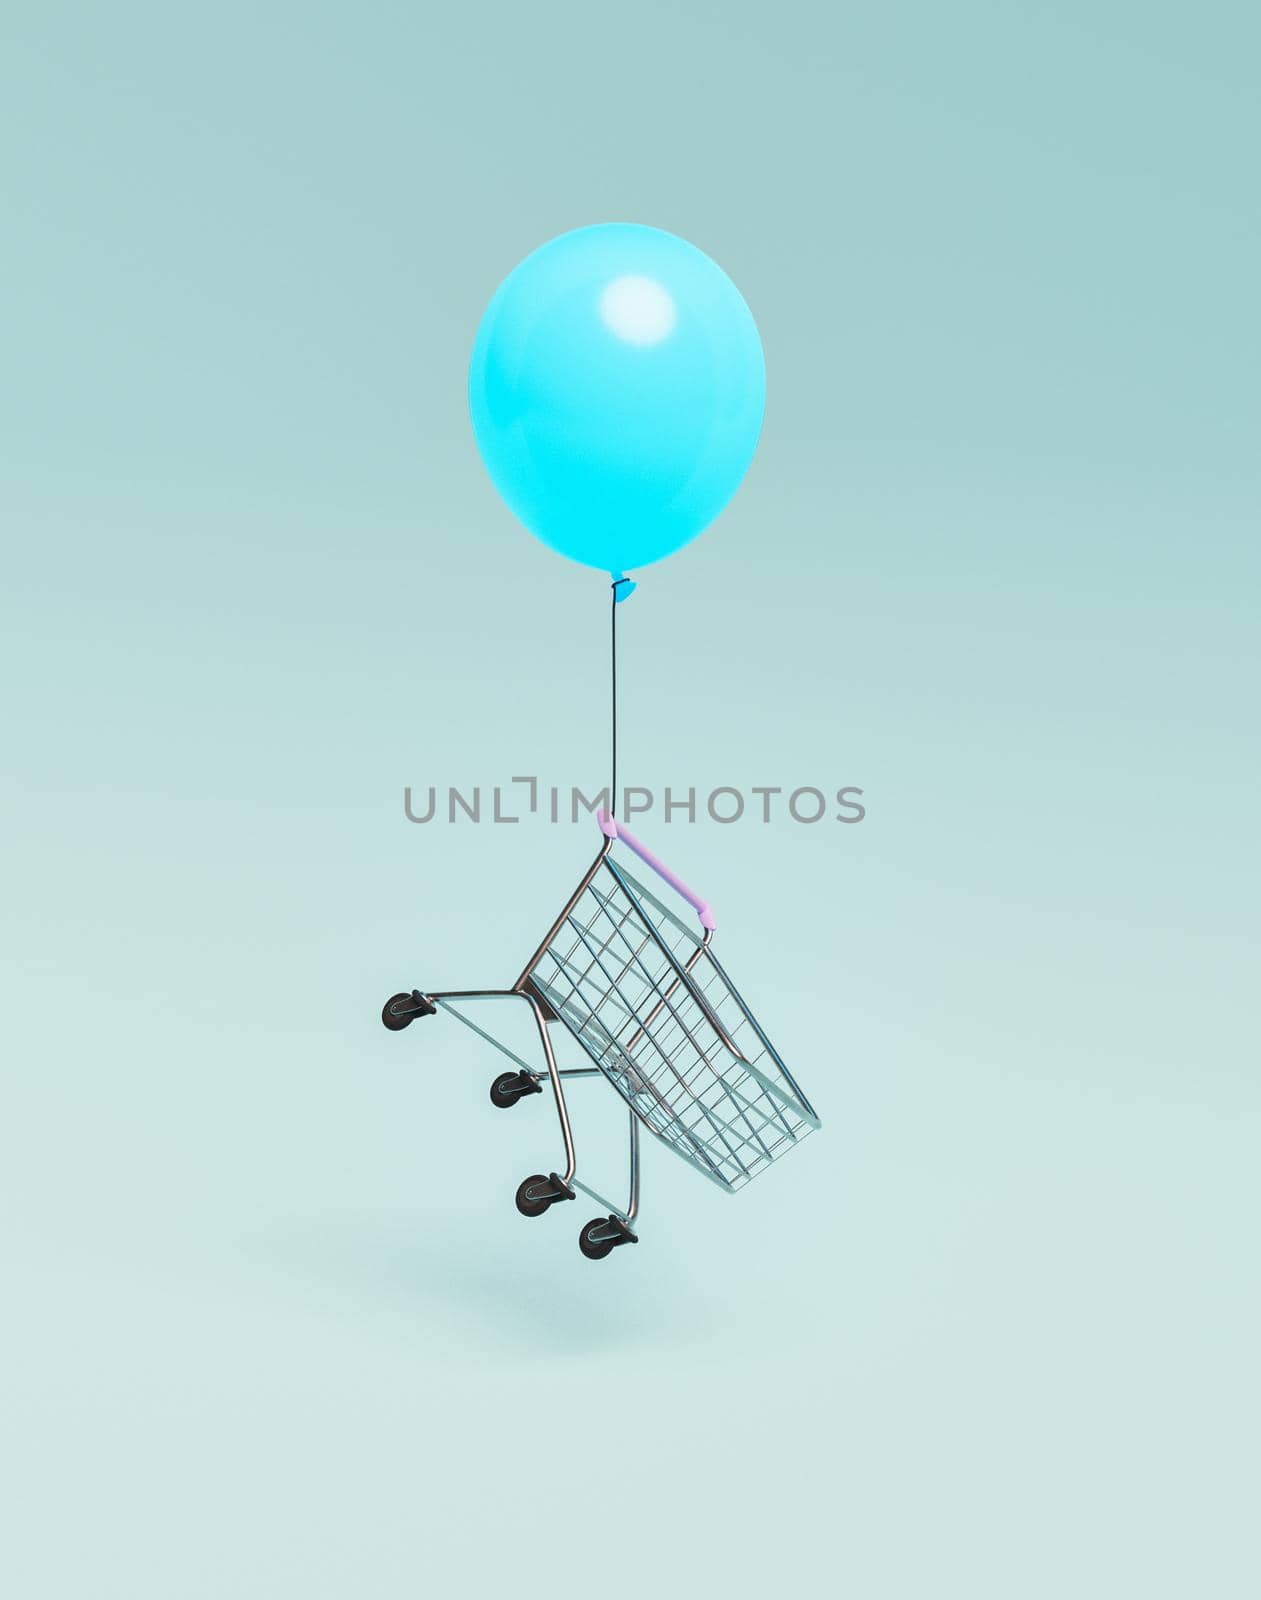 shopping cart floating with balloon by asolano